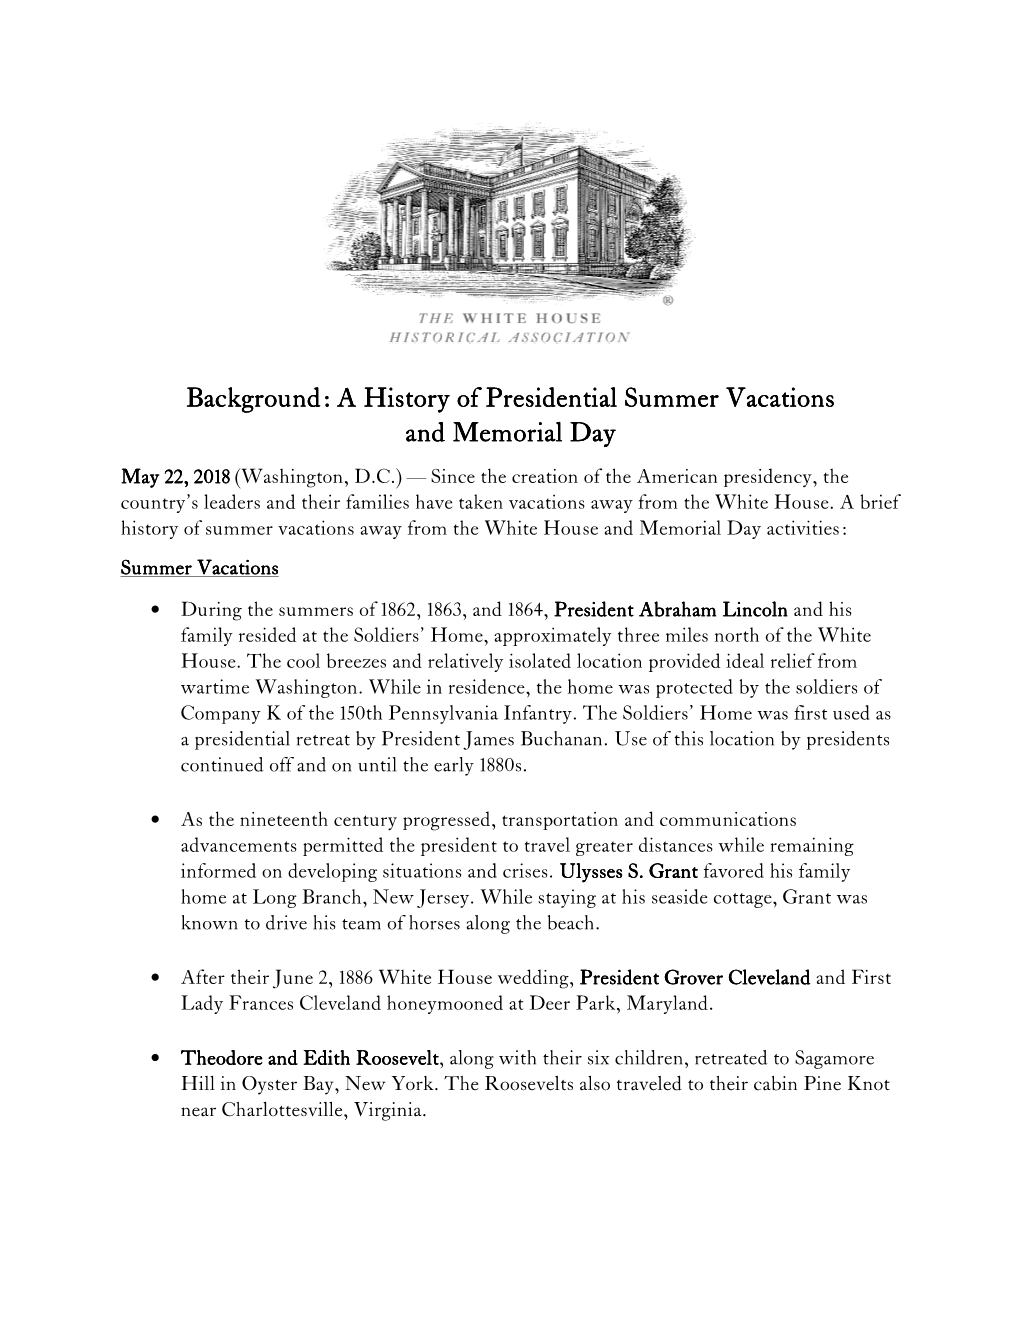 Background: a History of Presidential Summer Vacations and Memorial Day